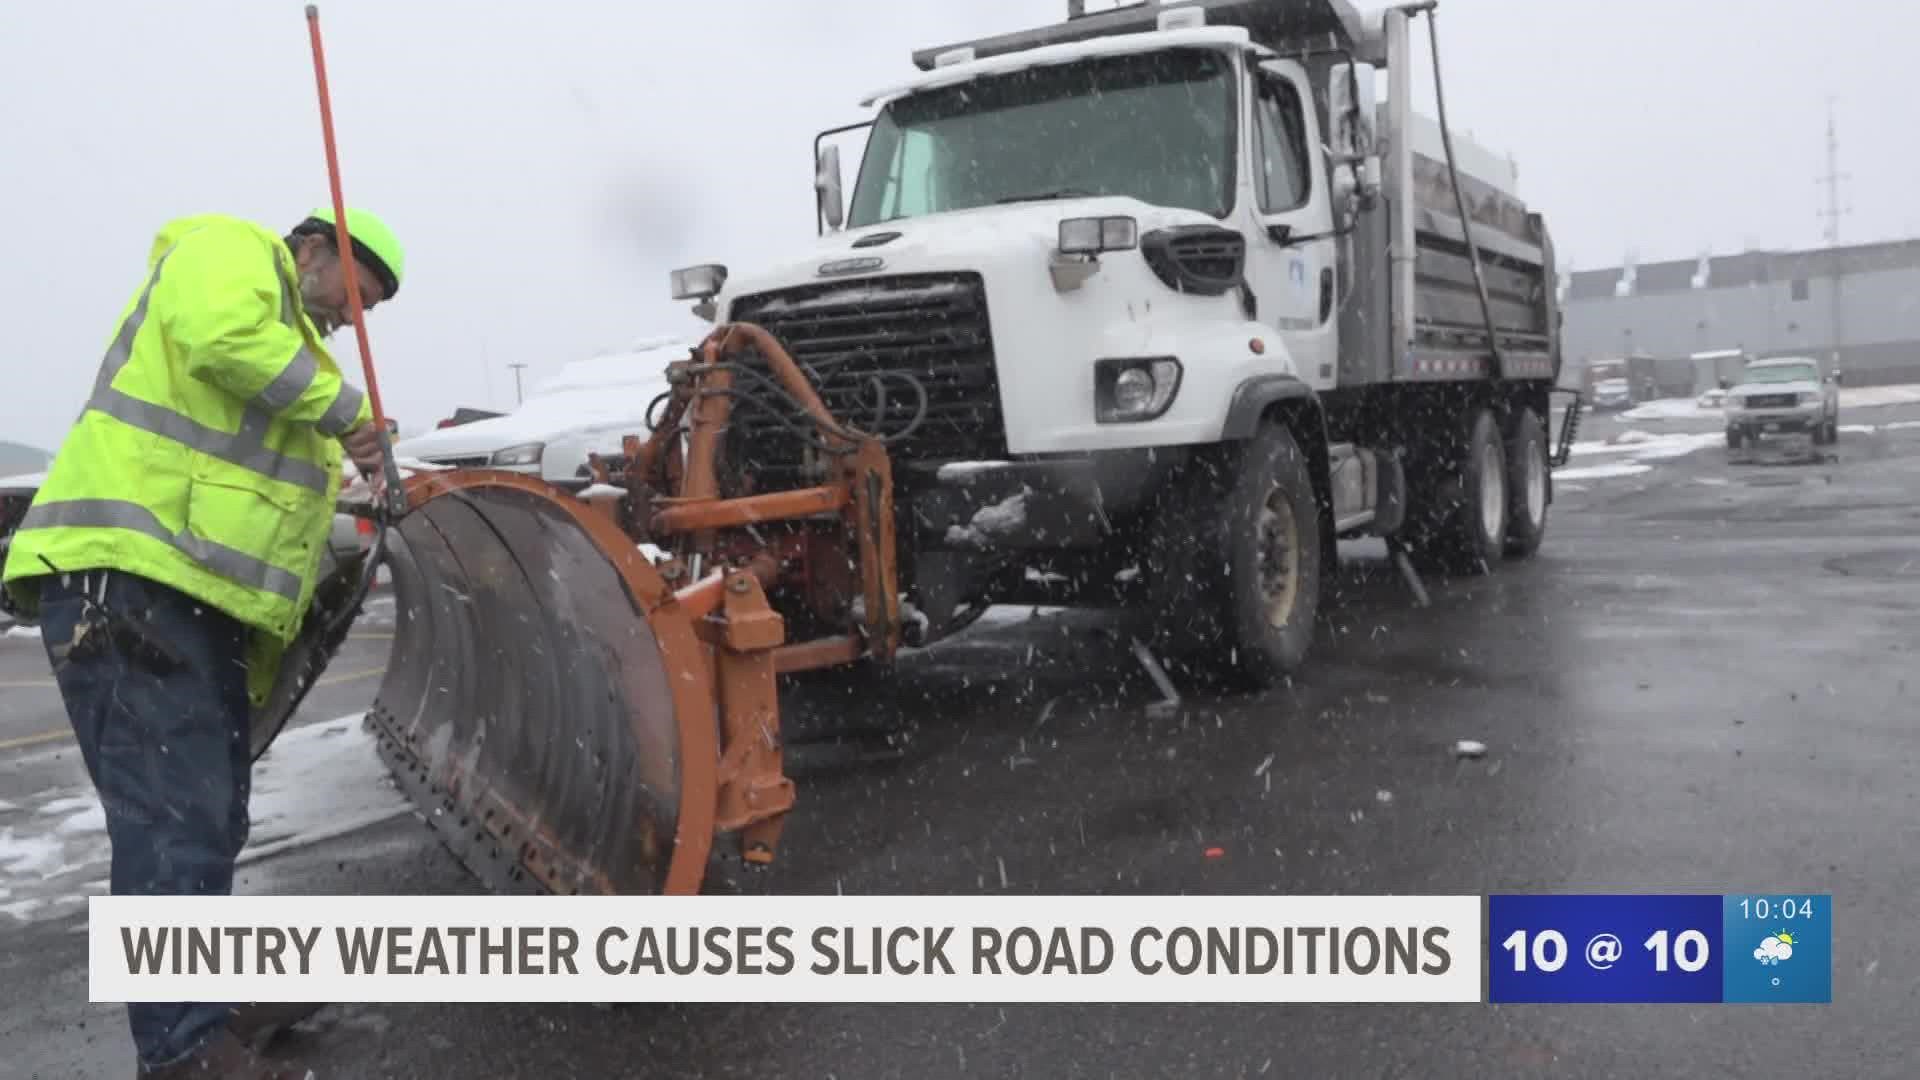 KREM 2's Kyle Simchuk ventured into the cold to see just how slick Spokane's roads are getting as temperatures continue to drop.